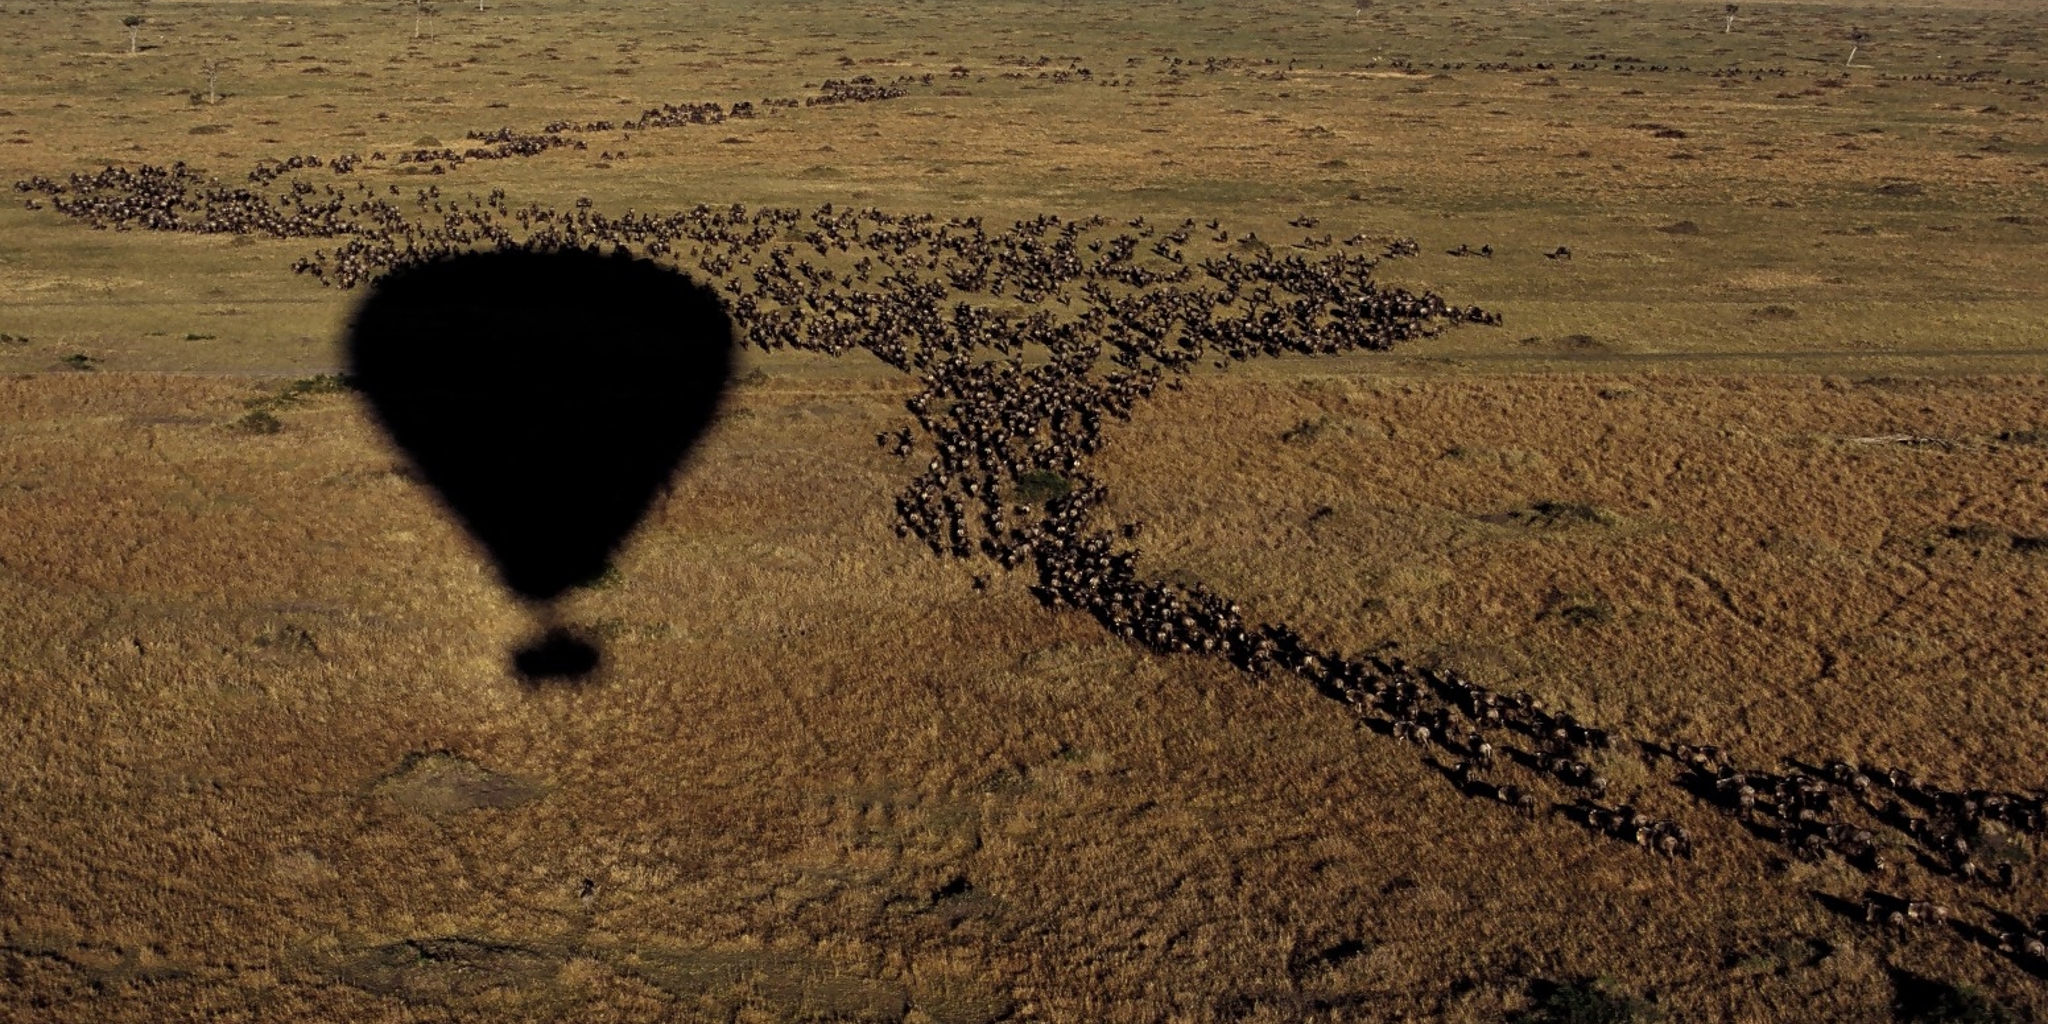 4.migration from a baloon